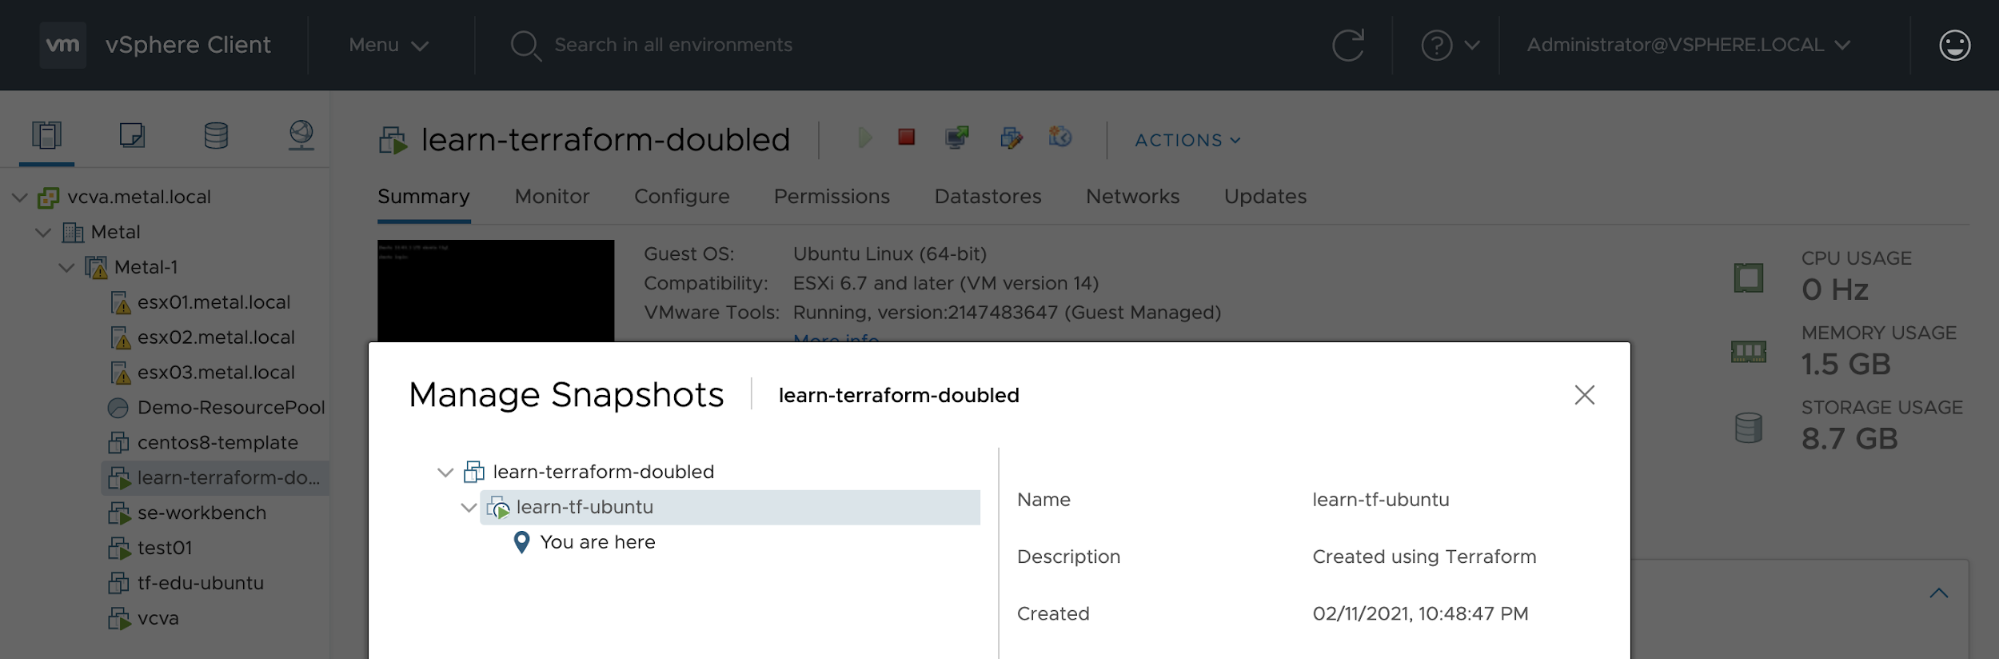 vSphere Client Dashboard showing newly created snapshot